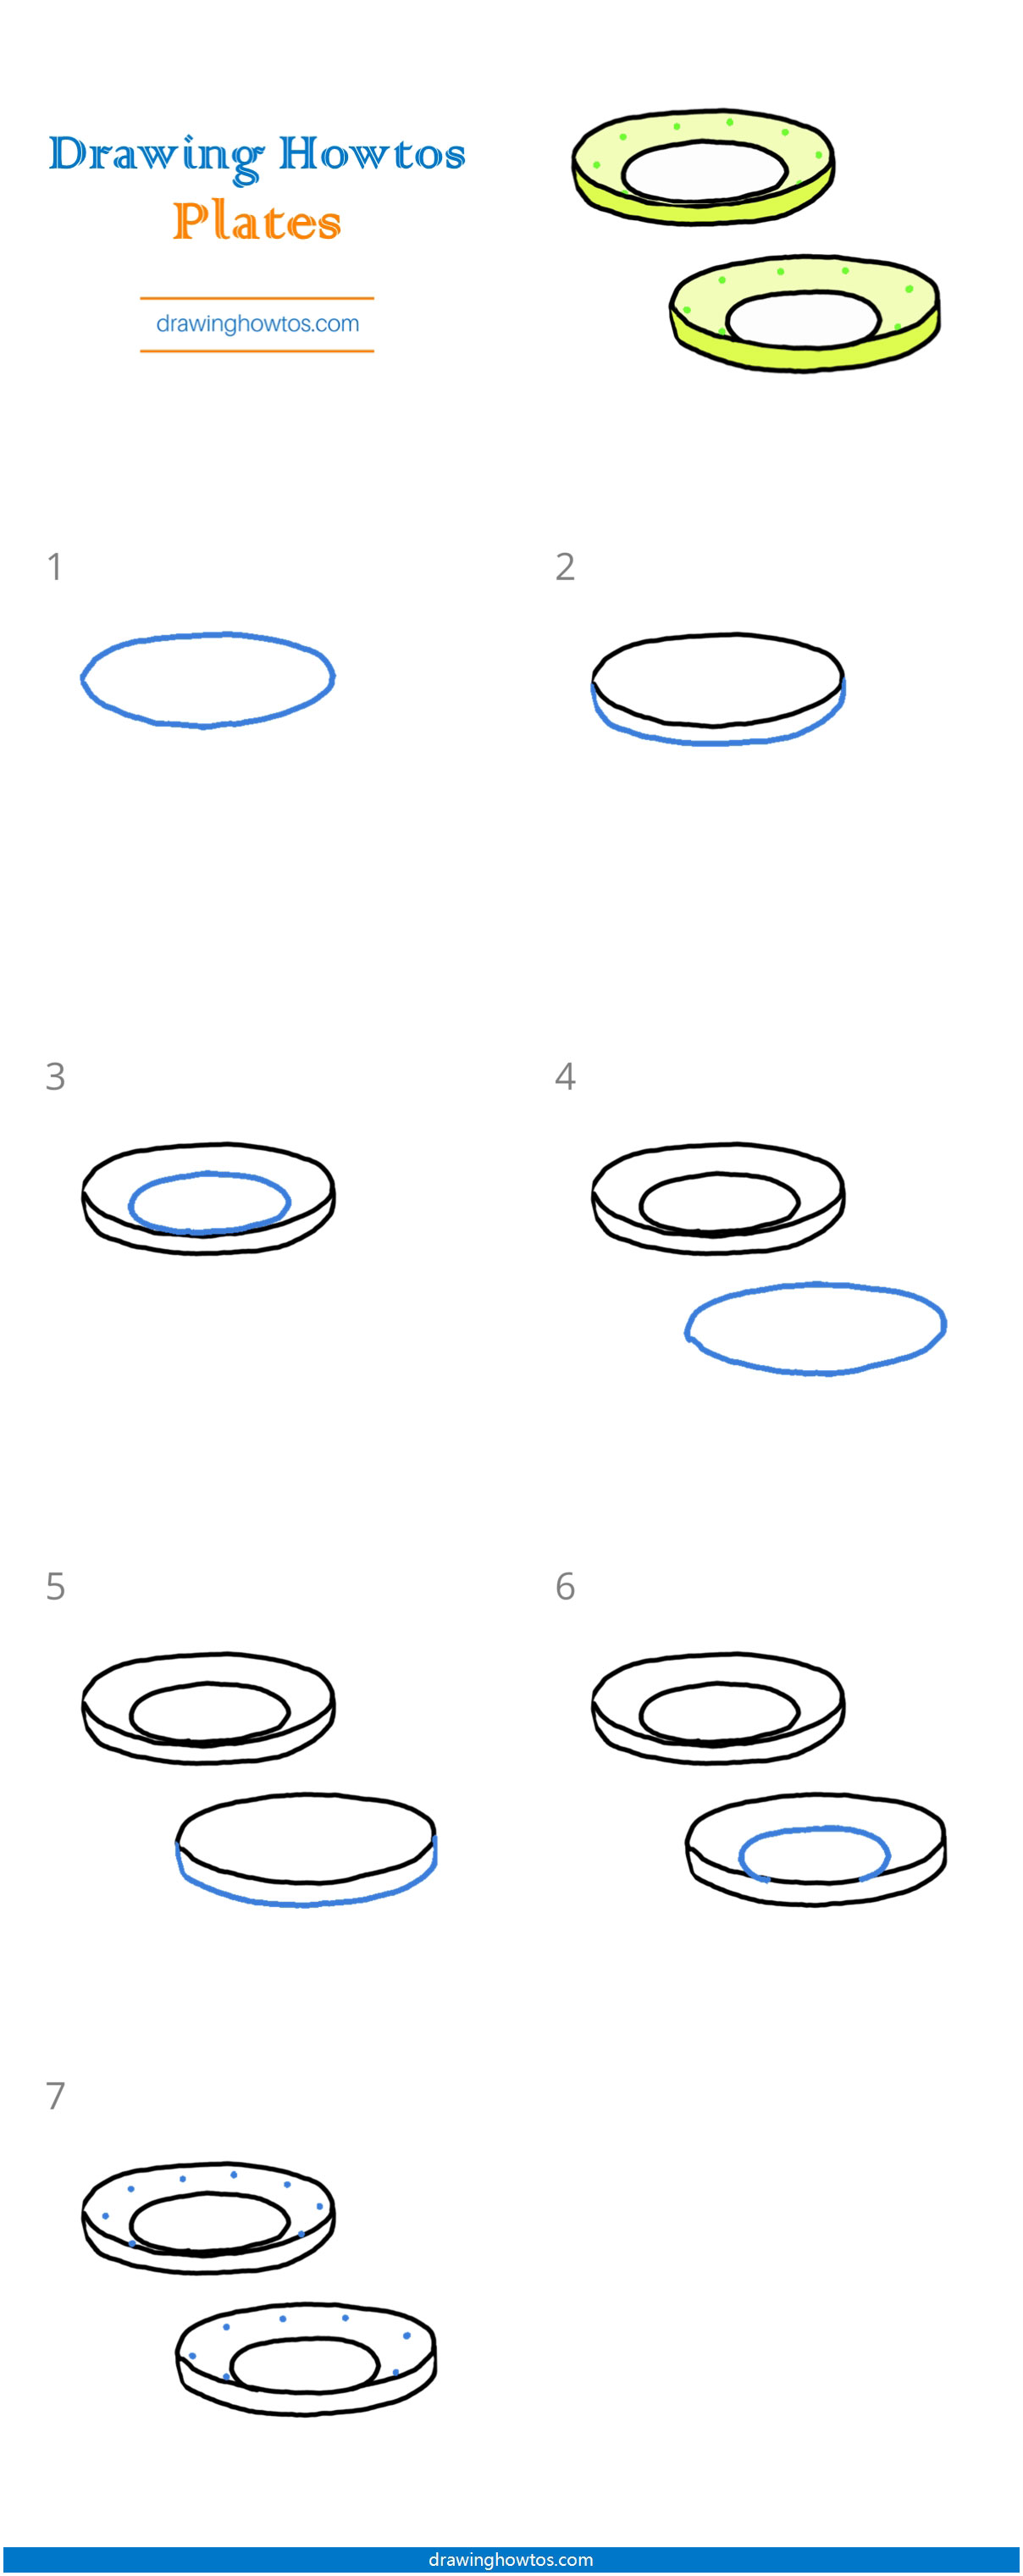 How to Draw Plates Step by Step